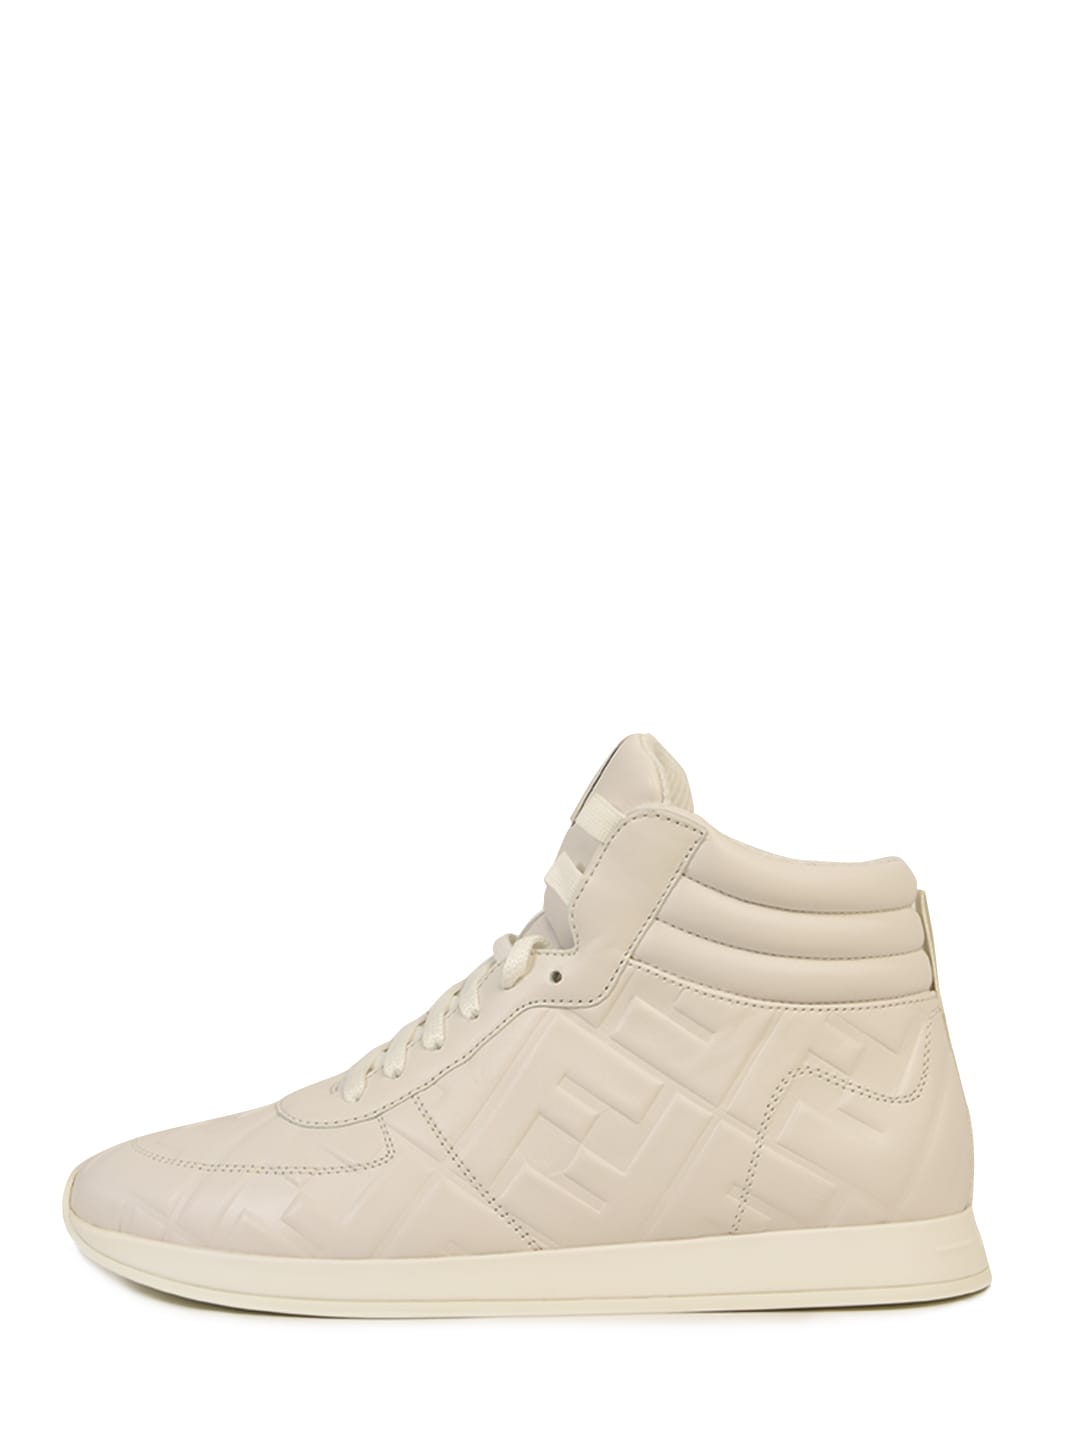 FENDI HIGH-TOP SNEAKER IN WHITE LEATHER,11270308